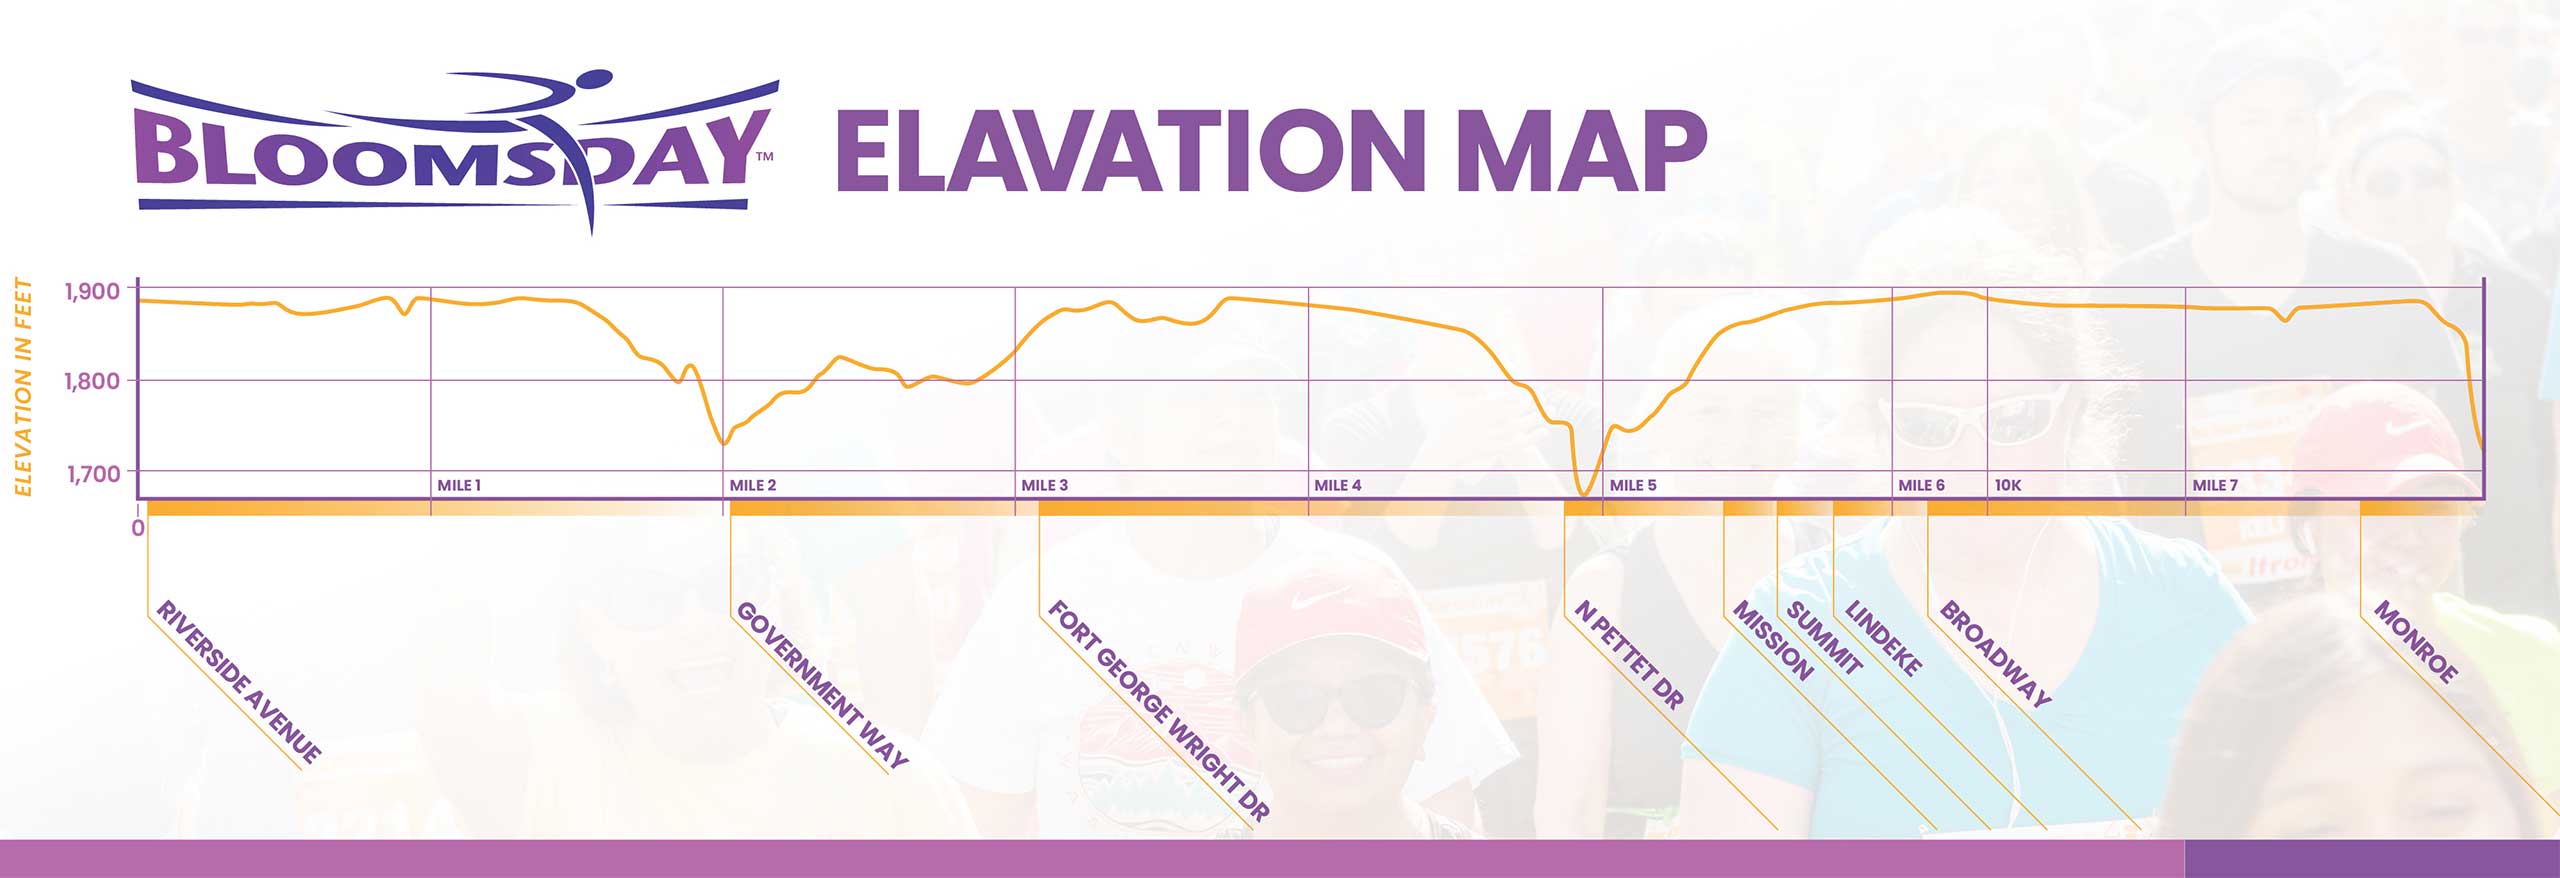 Bloomsday Elevation Map